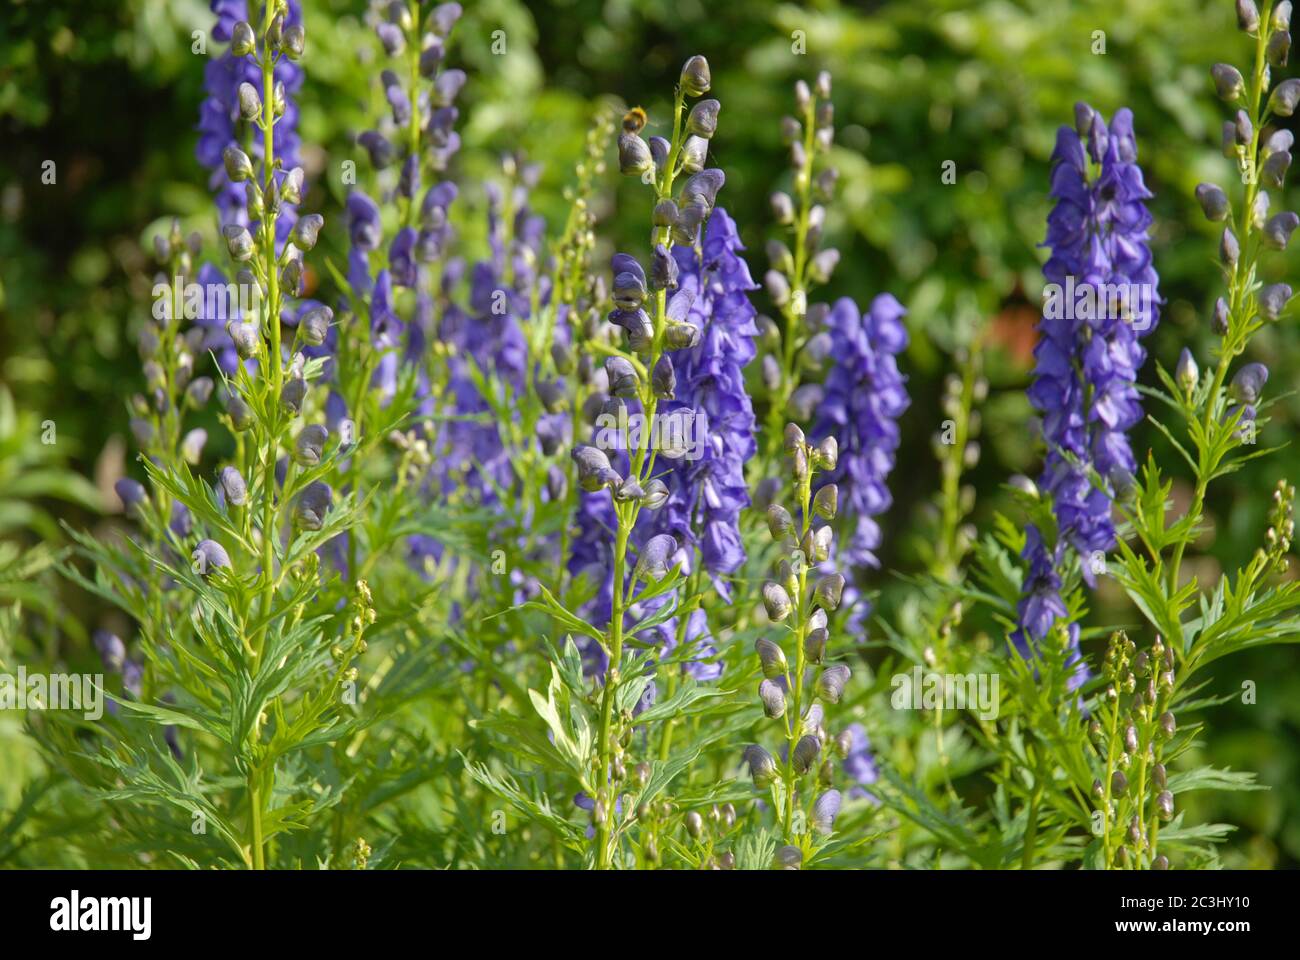 Aconitum napellus, also known as Monkshood or wolf's bane, a poisonous perennial herb Stock Photo